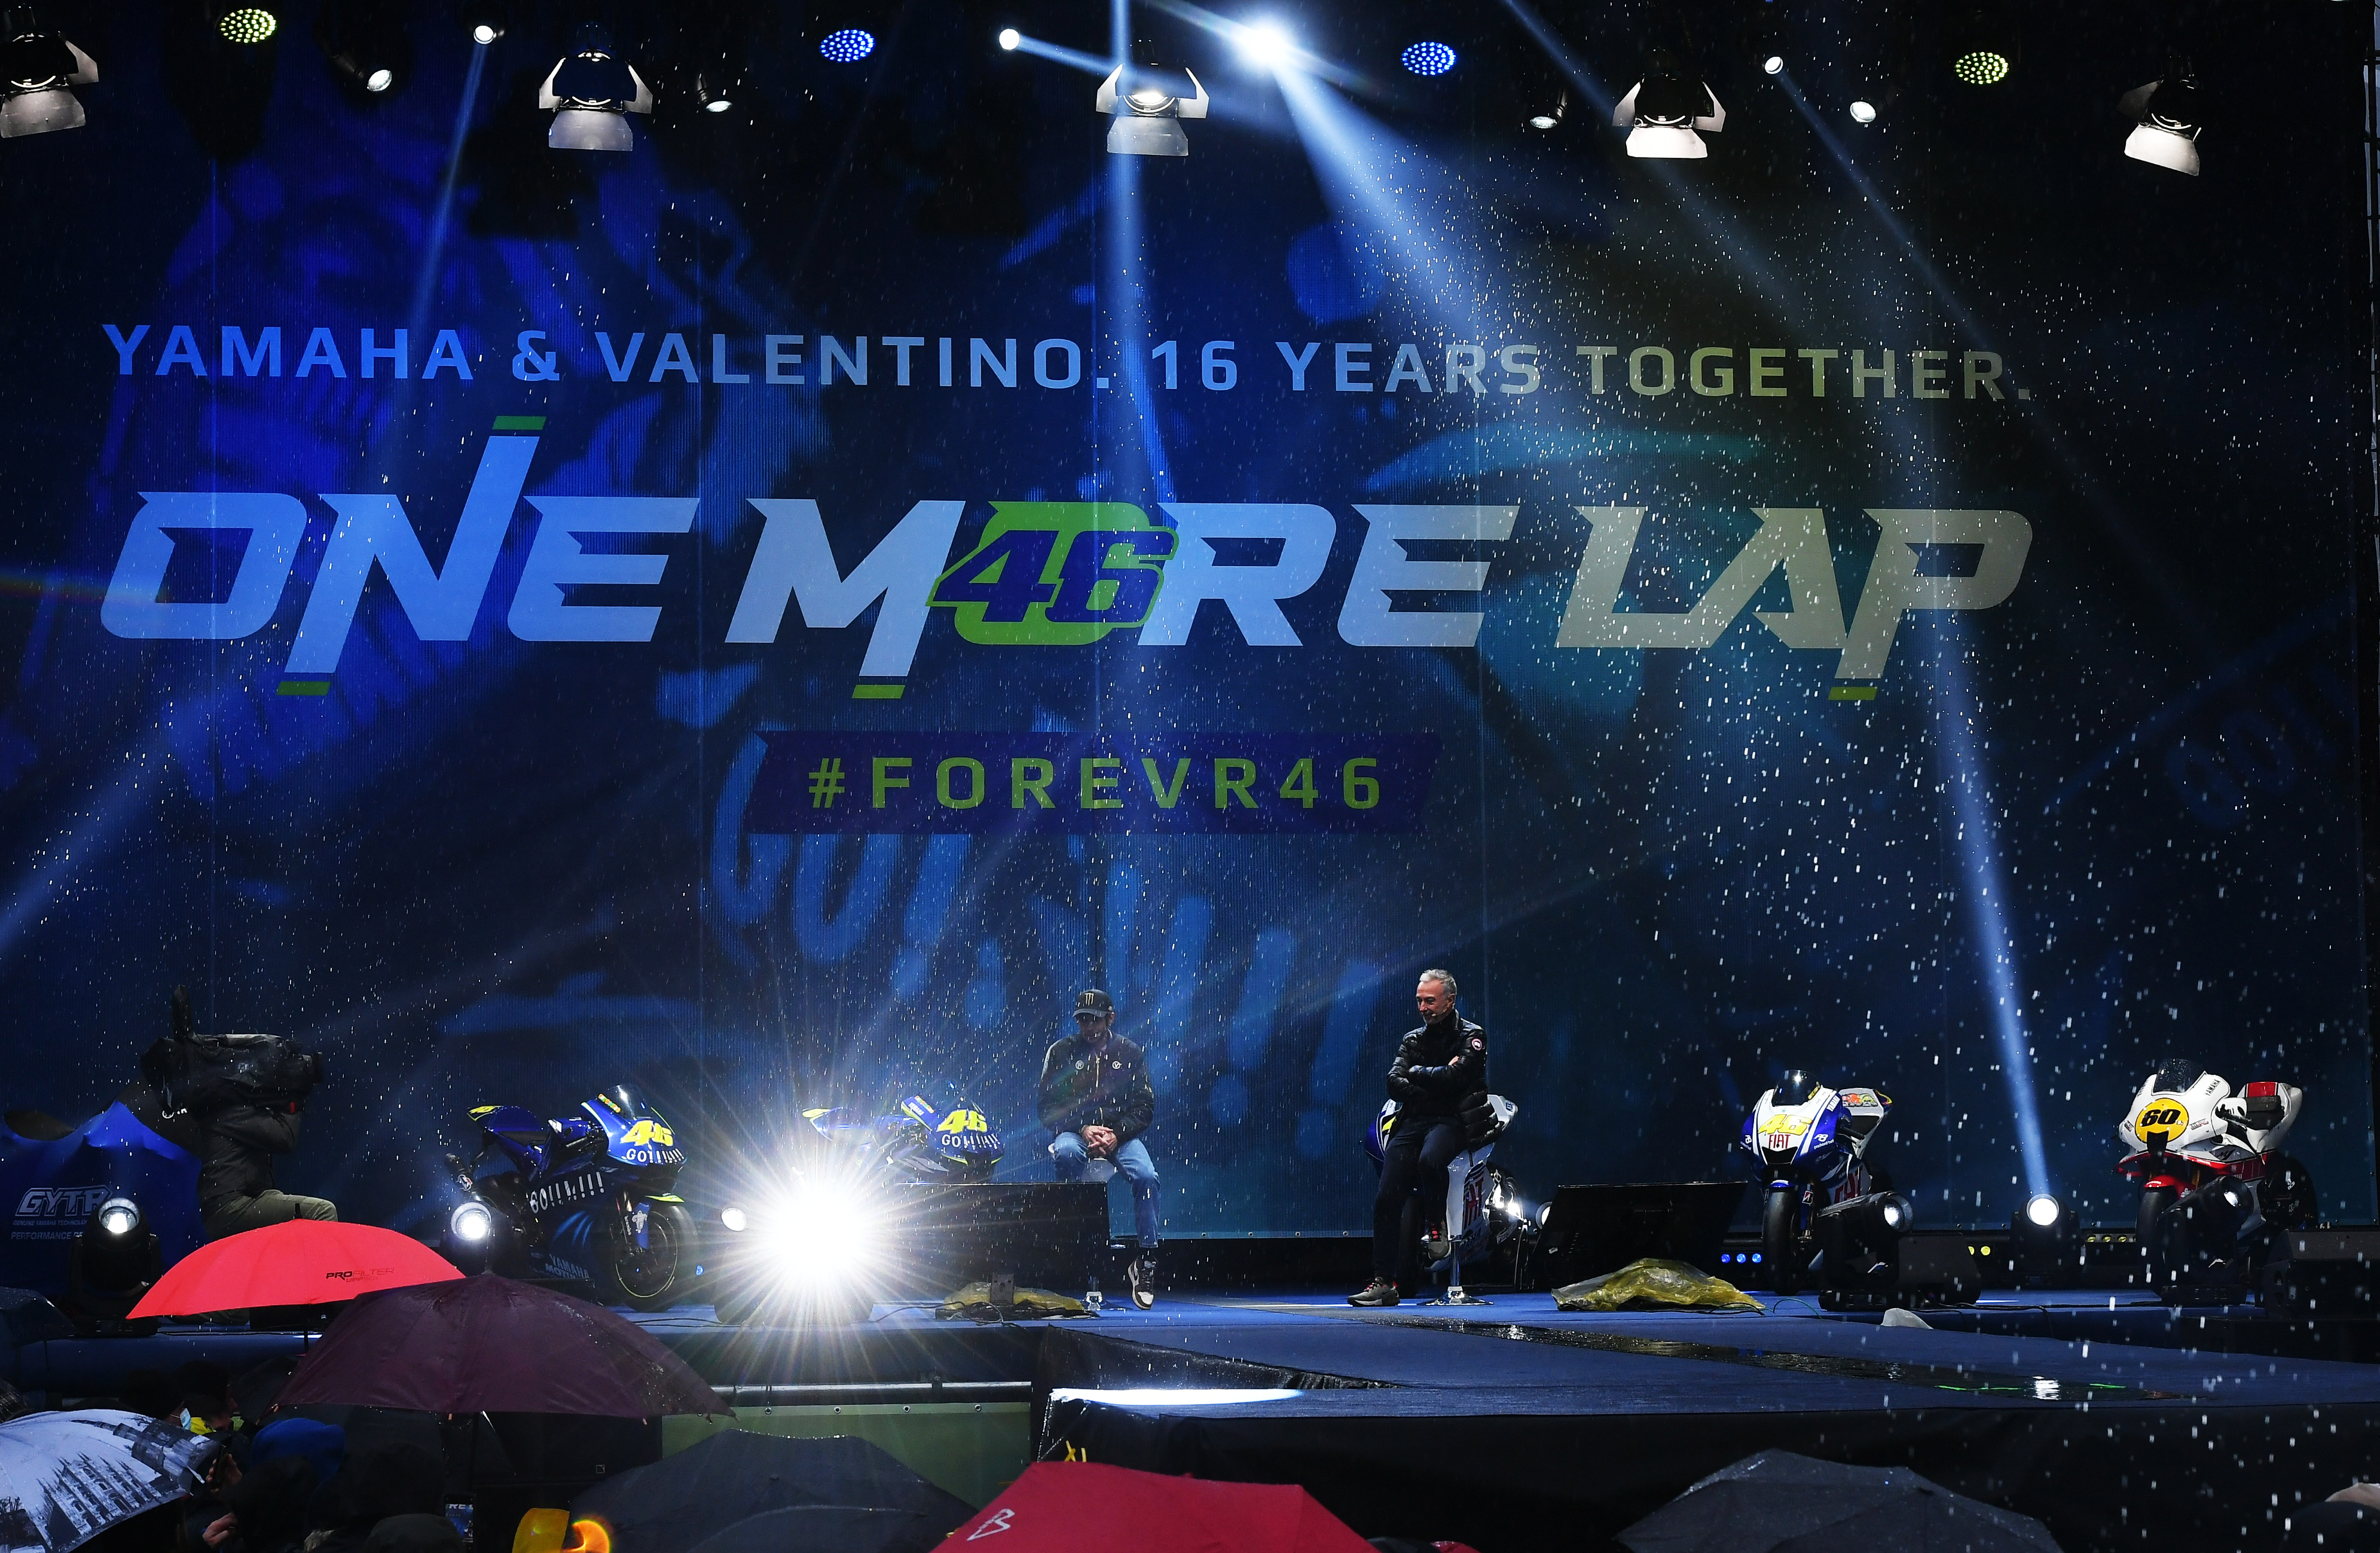 MotoGP legend Valentino Rossi celebrated at the EICMA motorcycle fair after his retirement